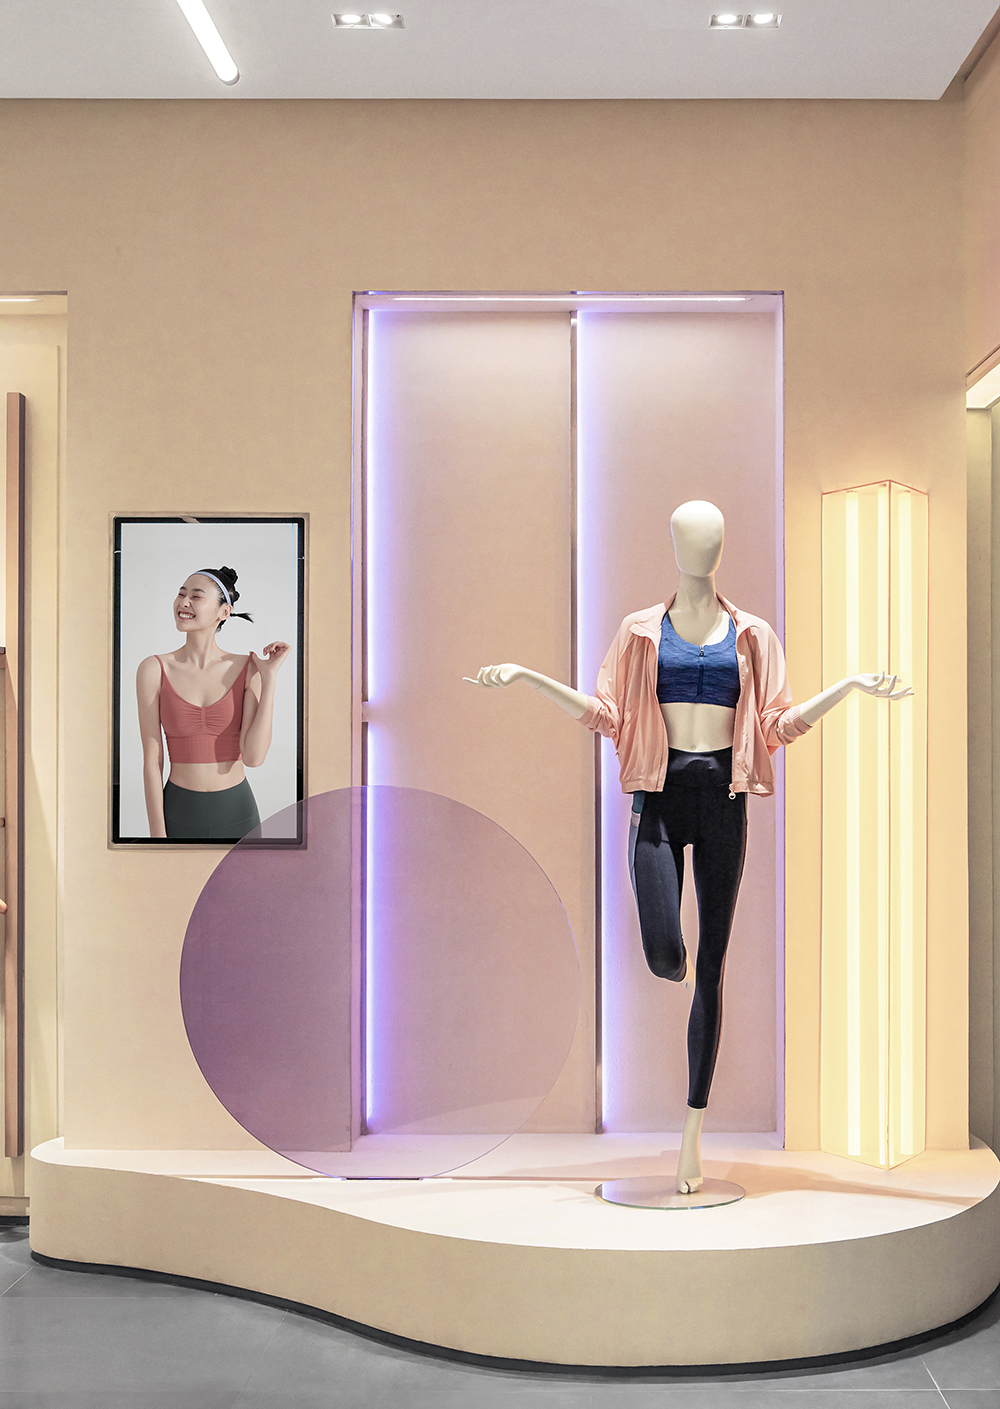 Maia Active Sportswear Store Designed with Sweet Treats in Mind